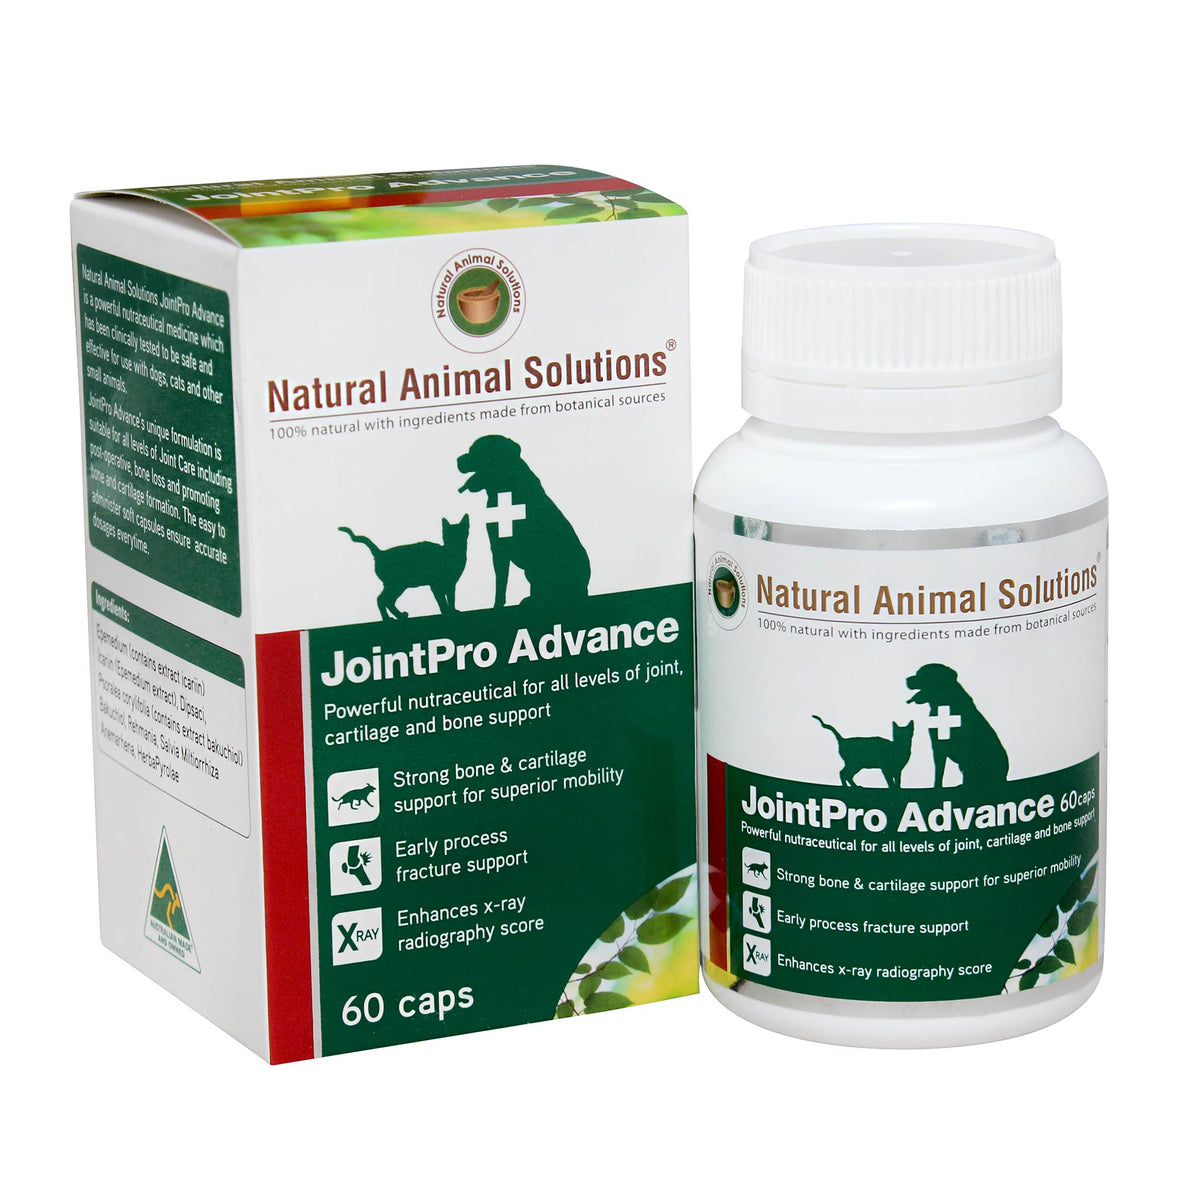 Natural Animal Solutions JointPro Advance 60 caps